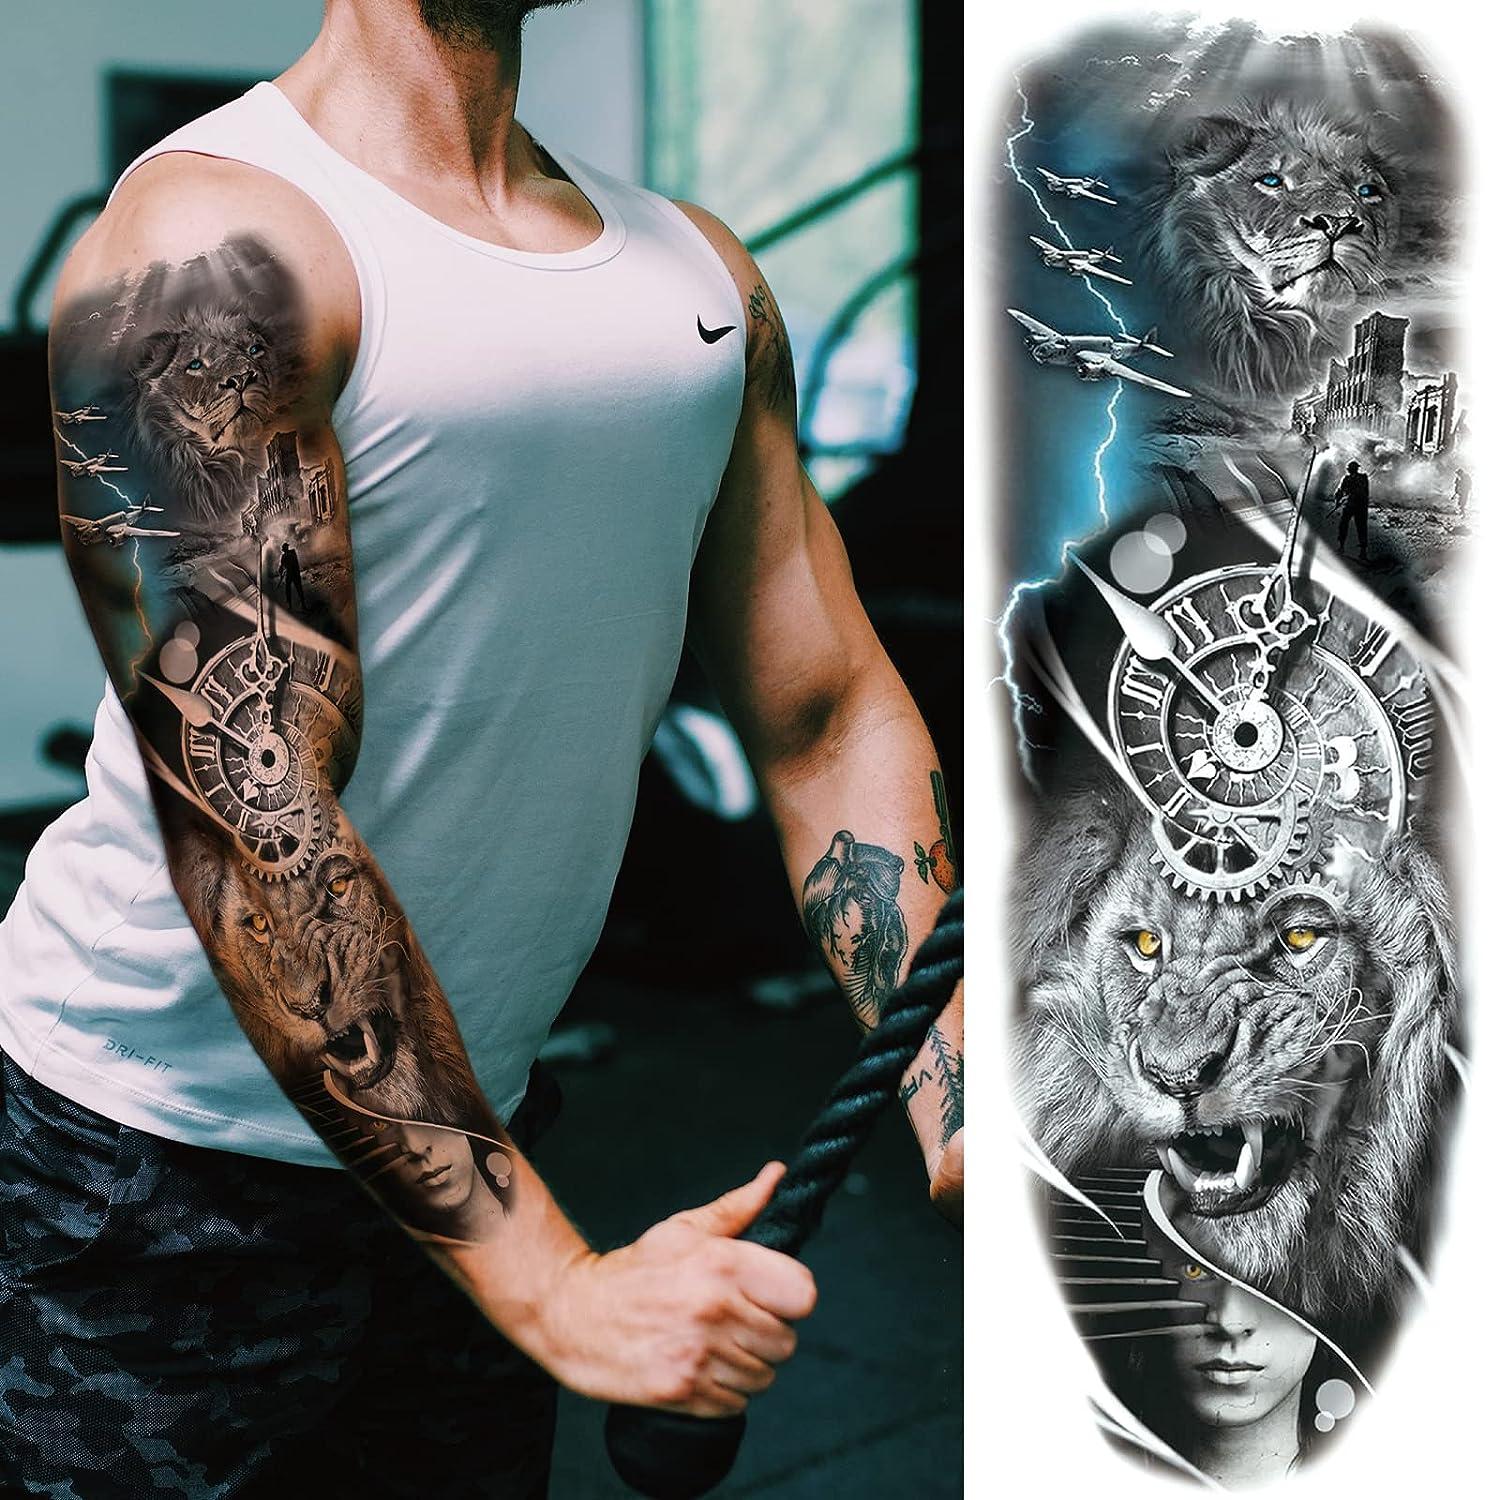 Plan a Sleeve Tattoo – Full Guide